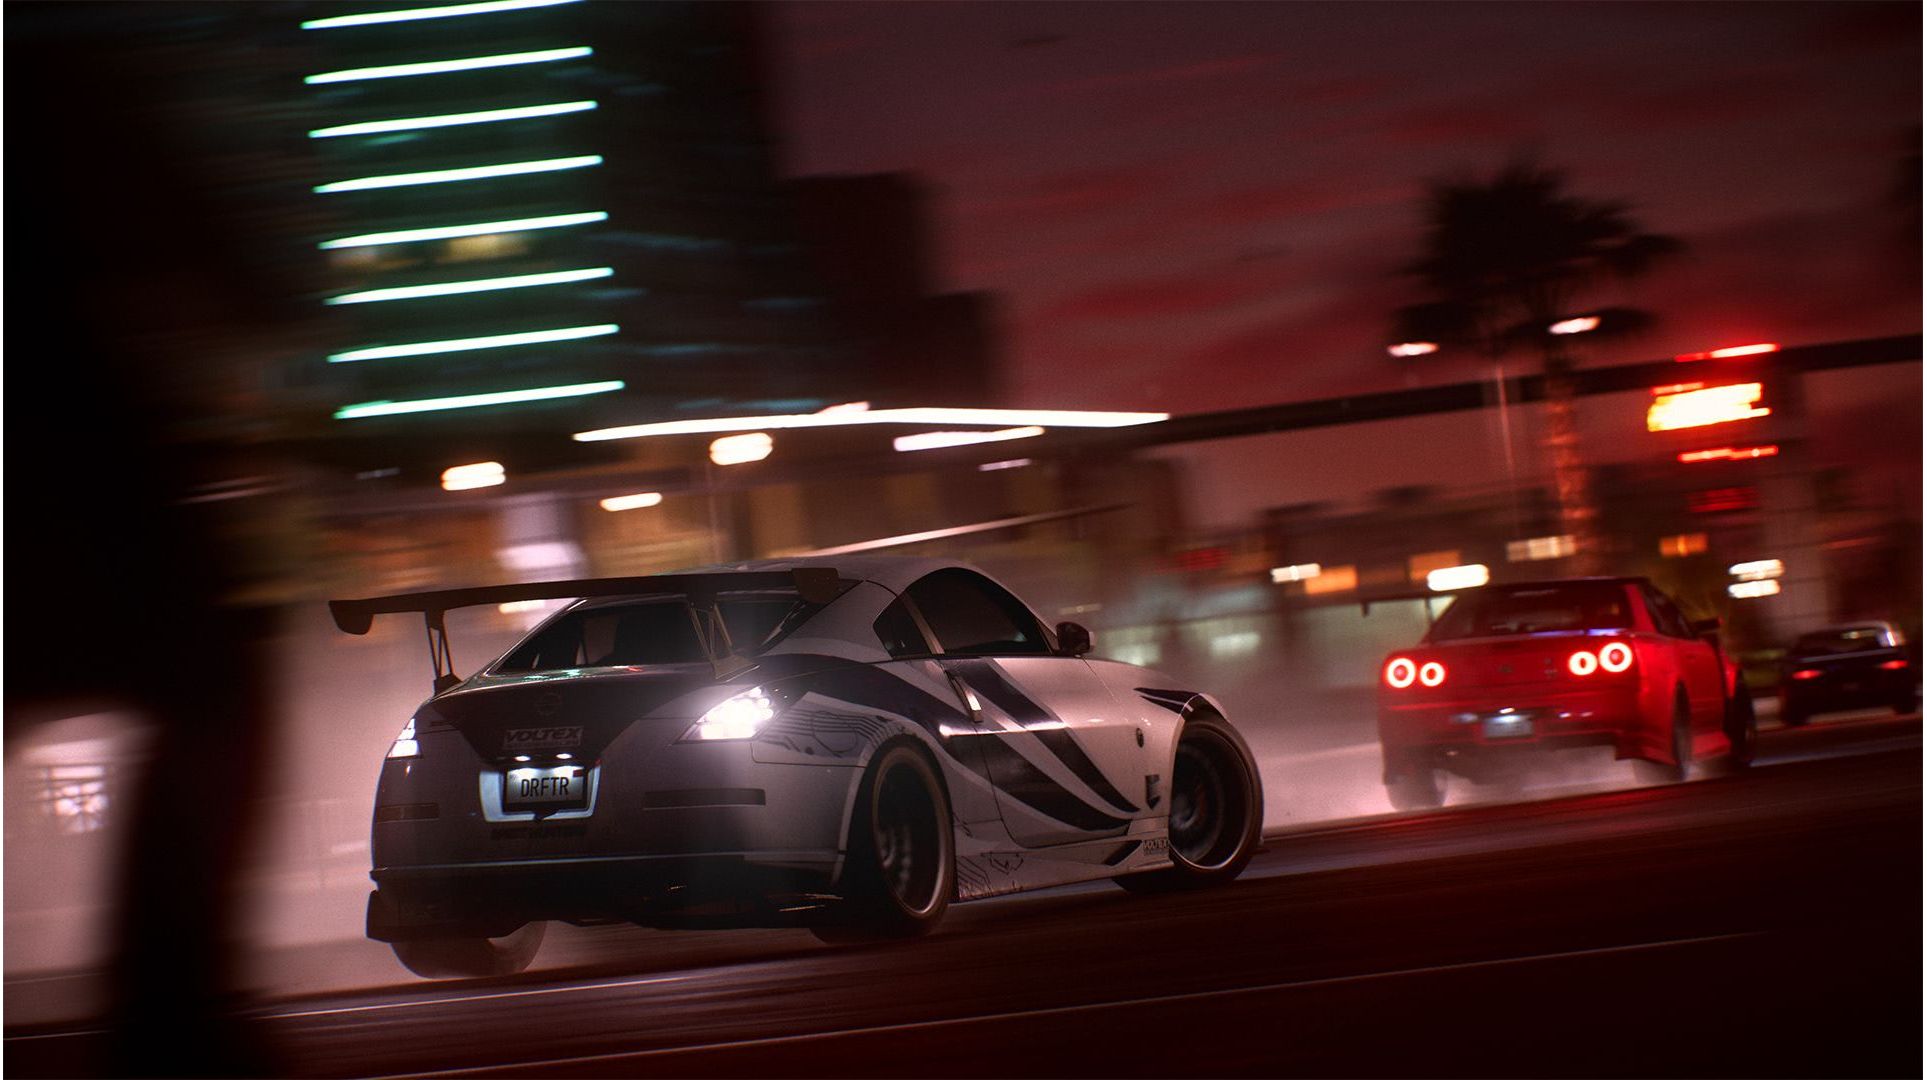 Need for speed playback. Need for Speed Nissan 370z. Нфс пейбек. Need for Speed: Payback. Need for Speed пайбек.